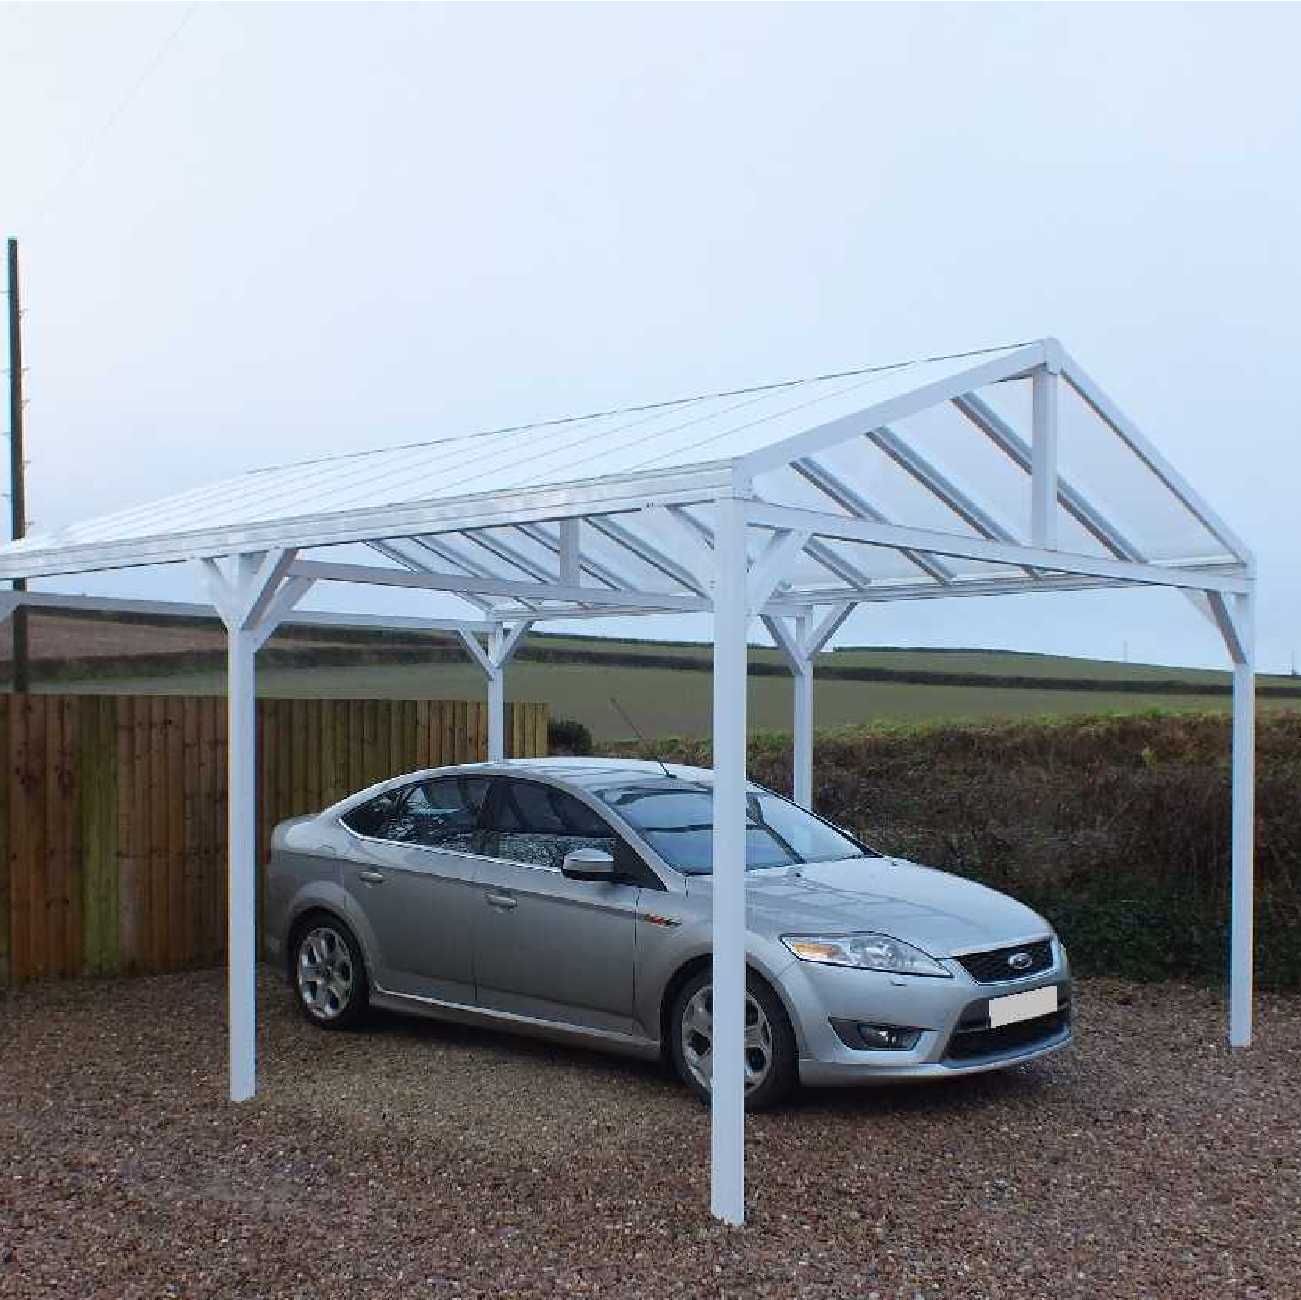 Affordable Omega Smart Free-Standing, White Gable-Roof (type 1) Canopy with 16mm Polycarbonate Glazing - 8.4m (W) x 4.0m (P), (8) Supporting Posts